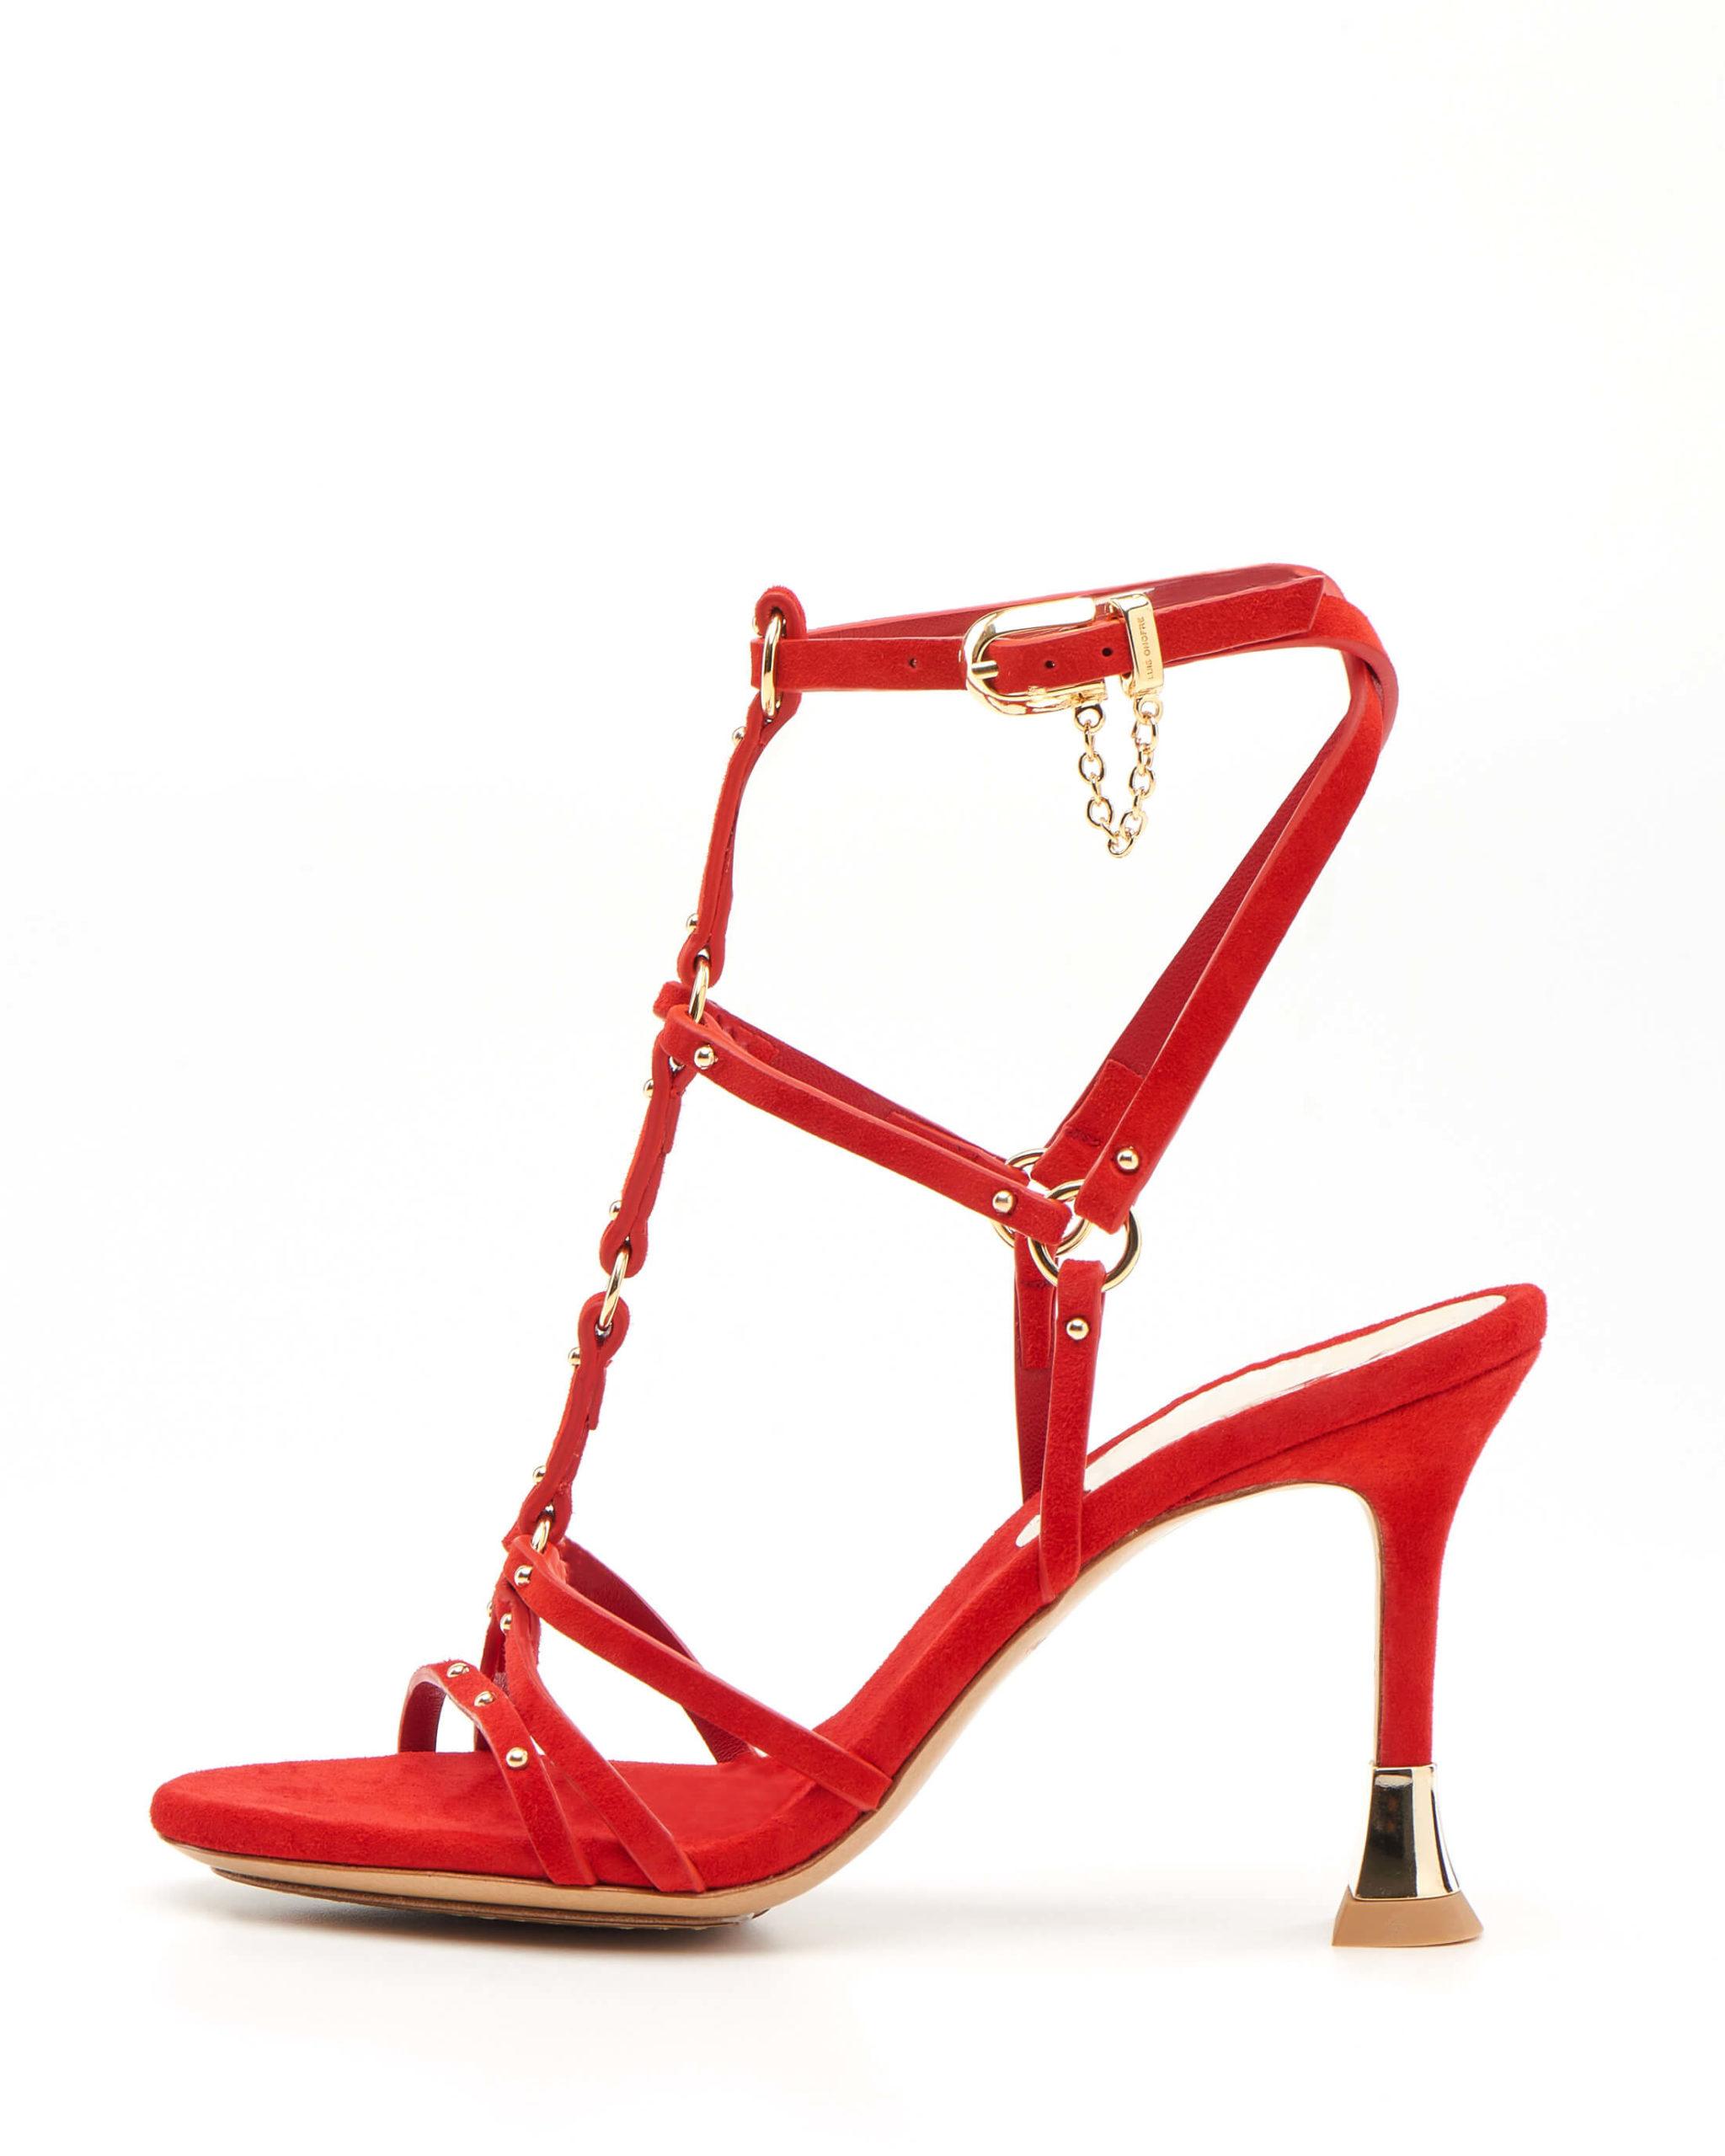 Strap Heeled Sandals in red